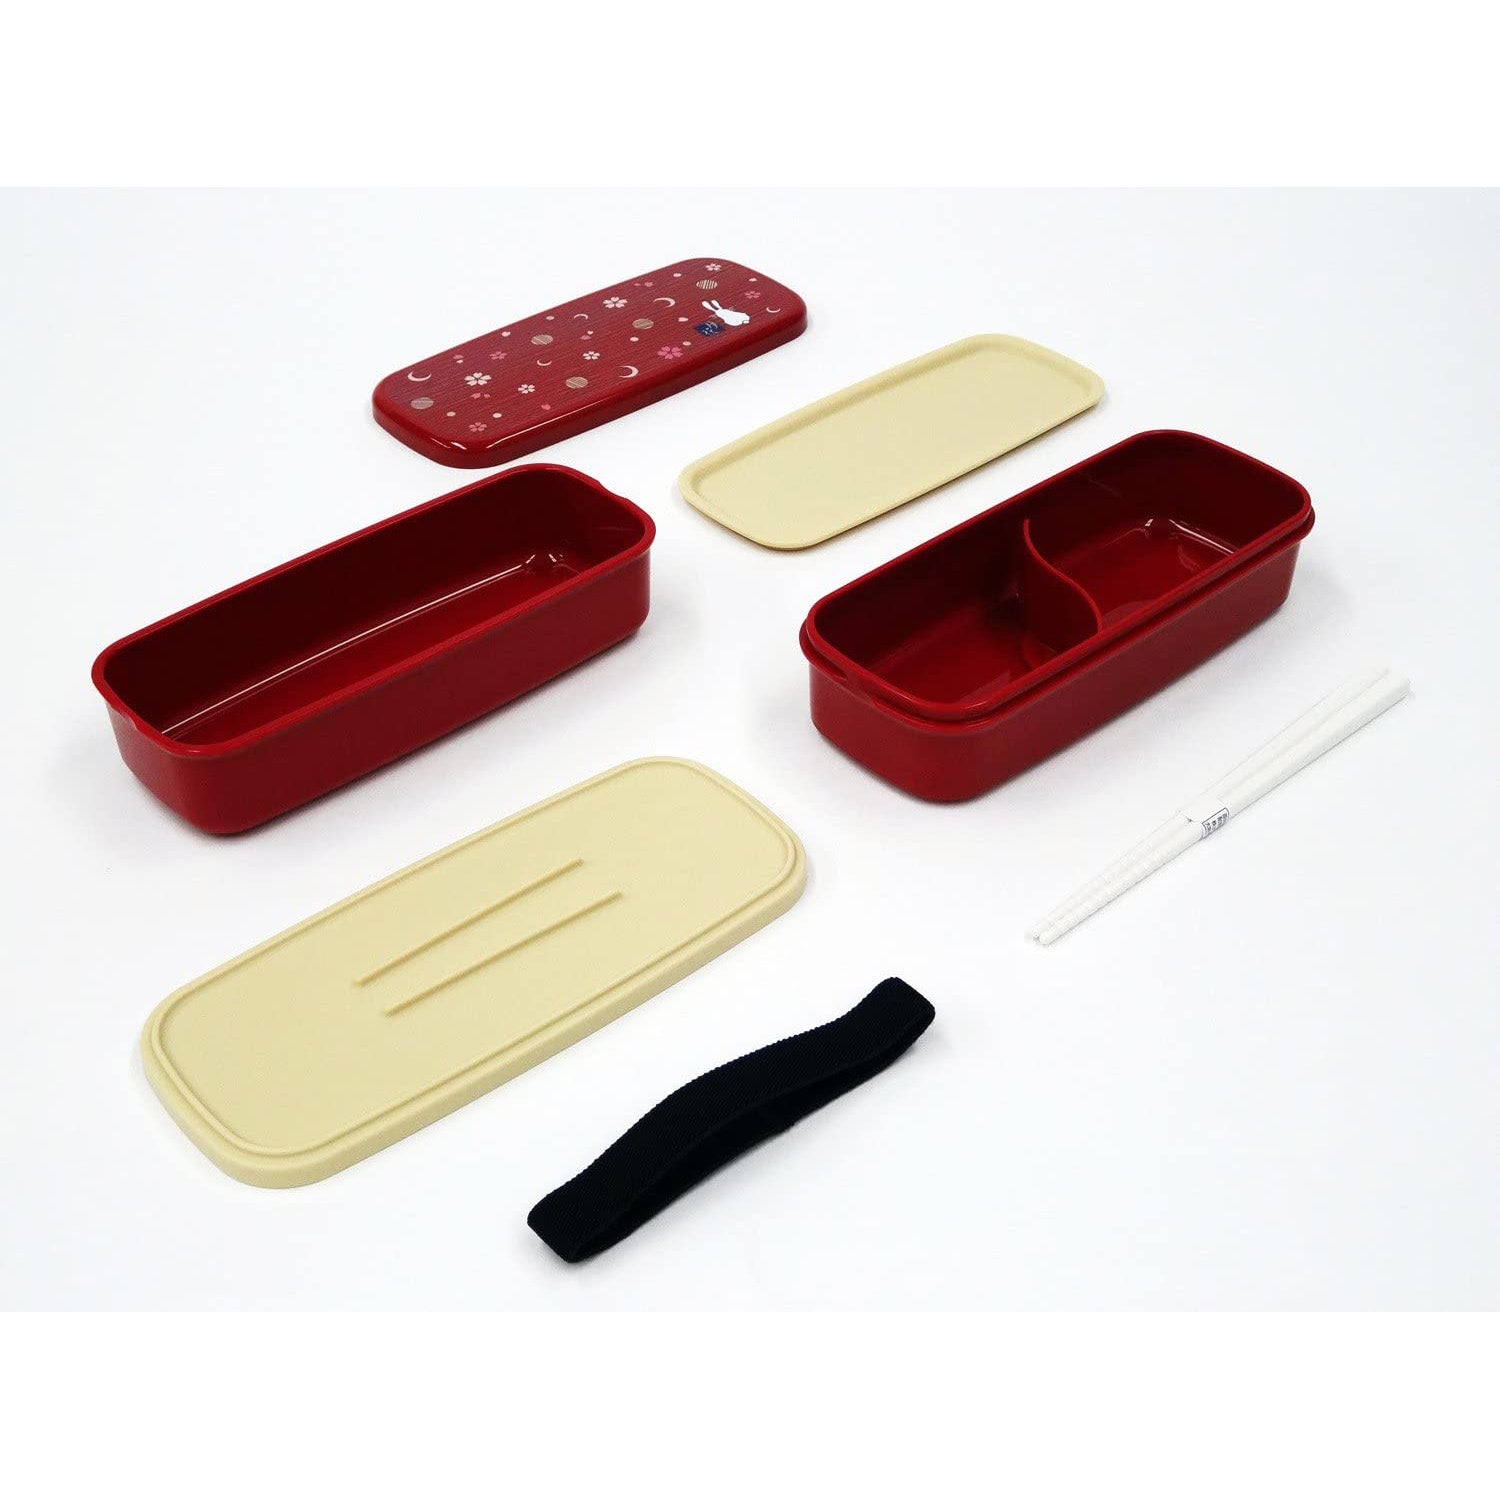 KIKUSUI Bento Box, 2-Tier Bento Box and Cutlery 4-Piece Set, 2-Tier Bento  Box, Removable Dividers, 4 Pieces, Bamboo, Unisex set002 ー The best place  to buy Japanese quality products, Samurai Mall